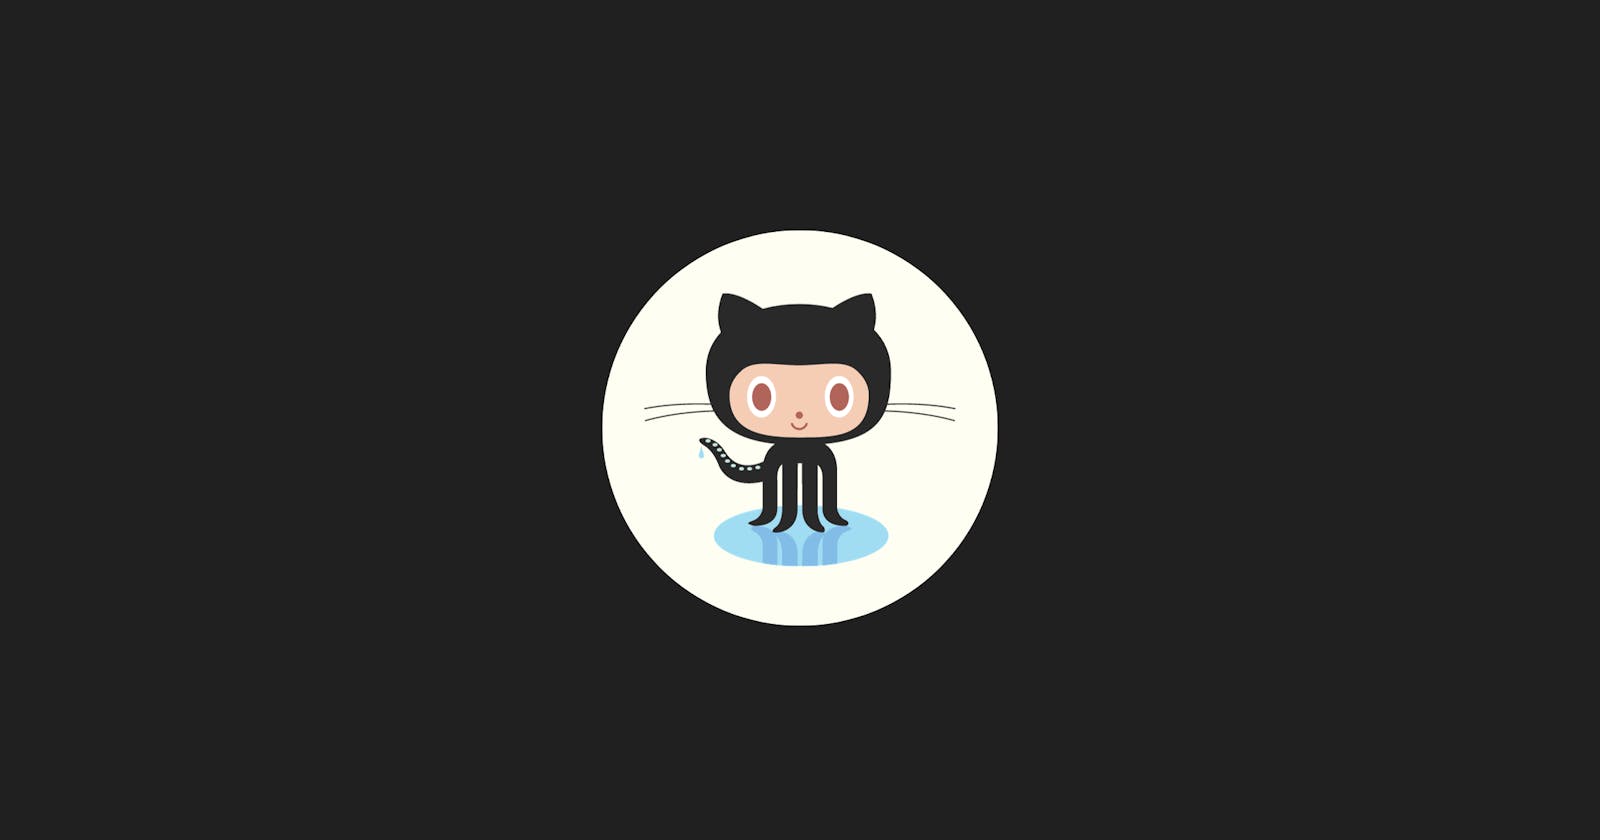 Welcome to GitHub - Where Amazing Things Happen